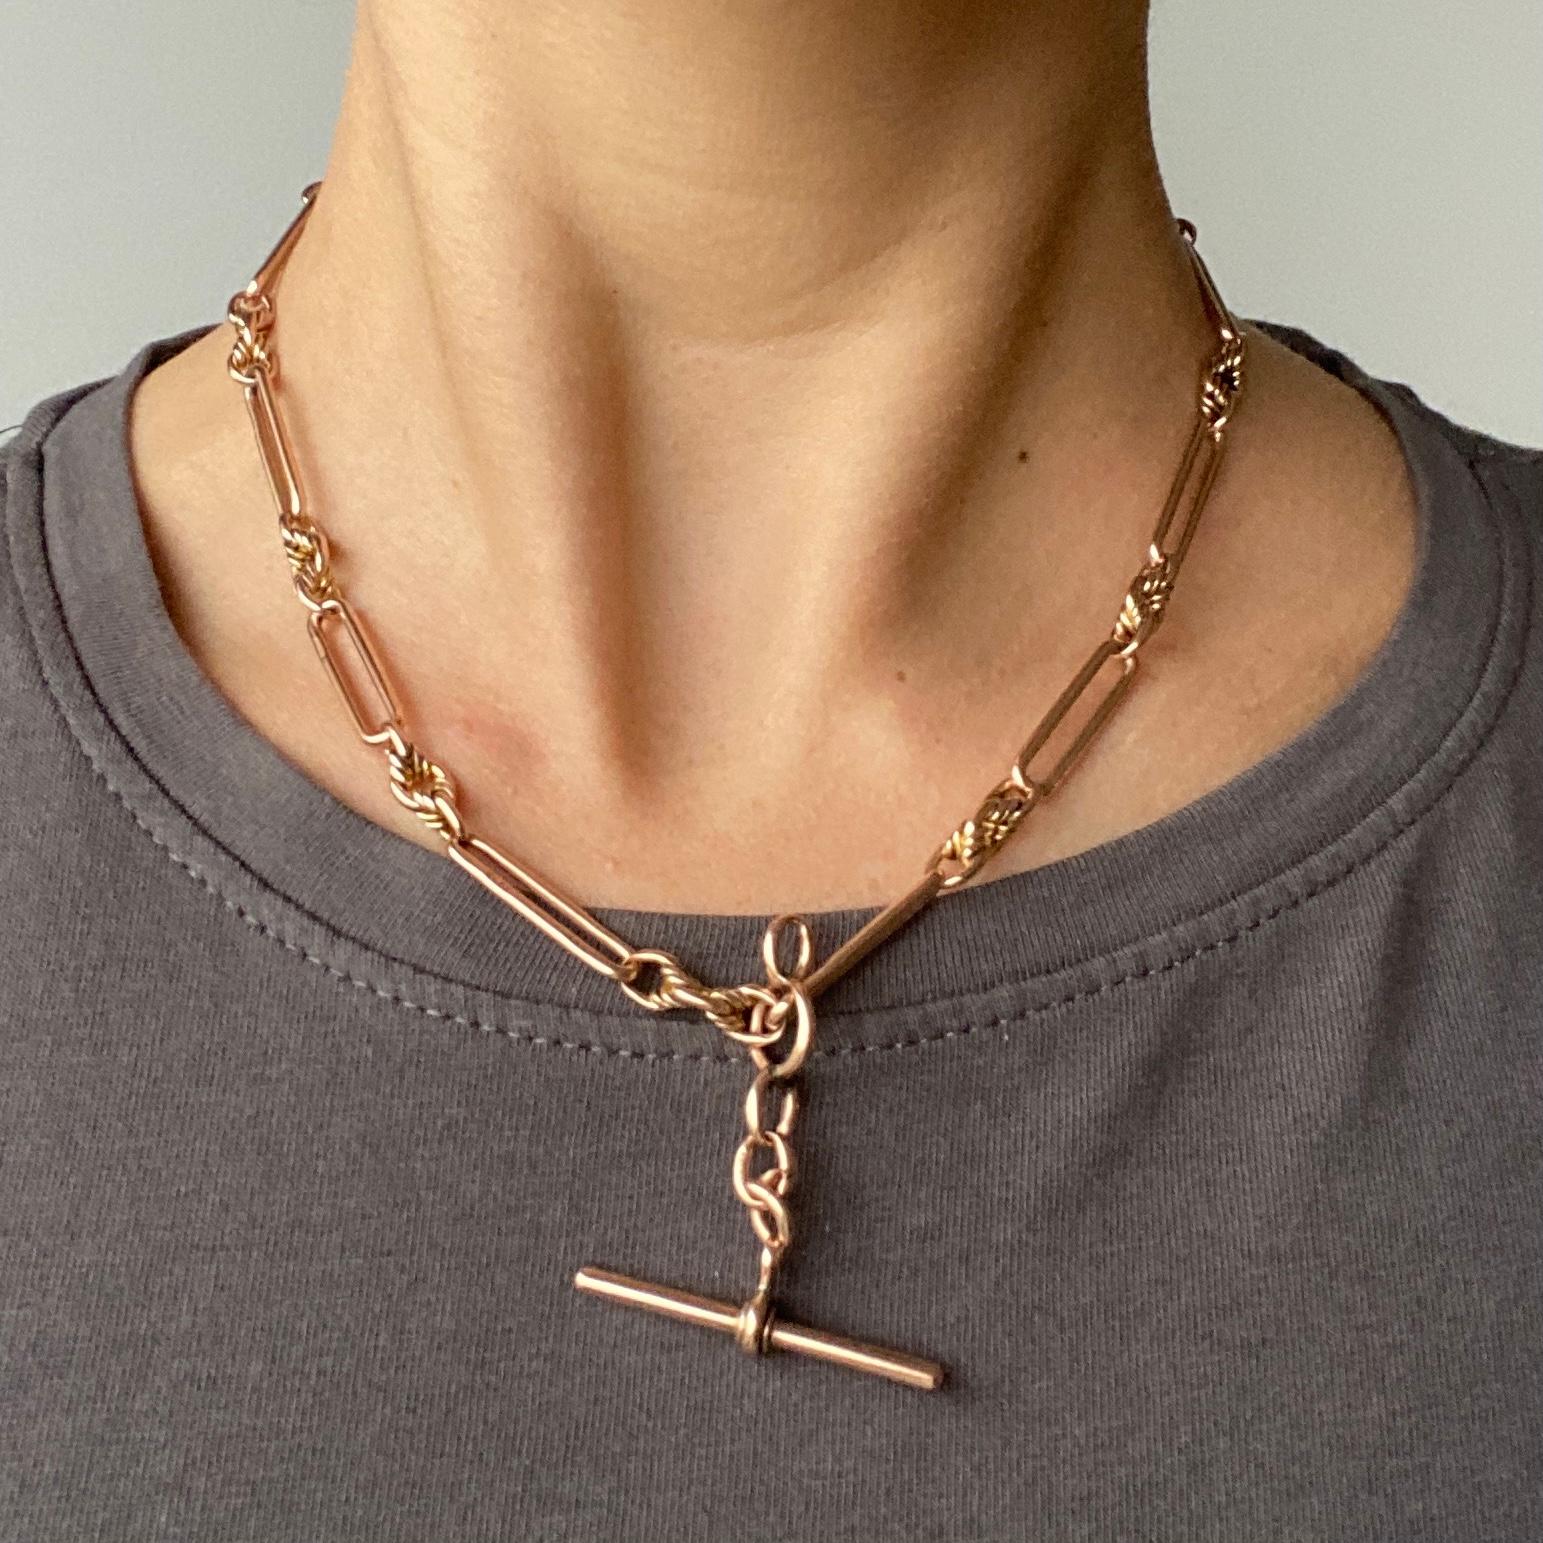 This gorgeous chain  has highly decorative links in it. One of the styles resembles the paperclip link and the other is layered, knotted and twisted. This chain also holds a t-bar, bolt clip and a dog clip. Modelled in 9ct rose gold.

Length: 42cm